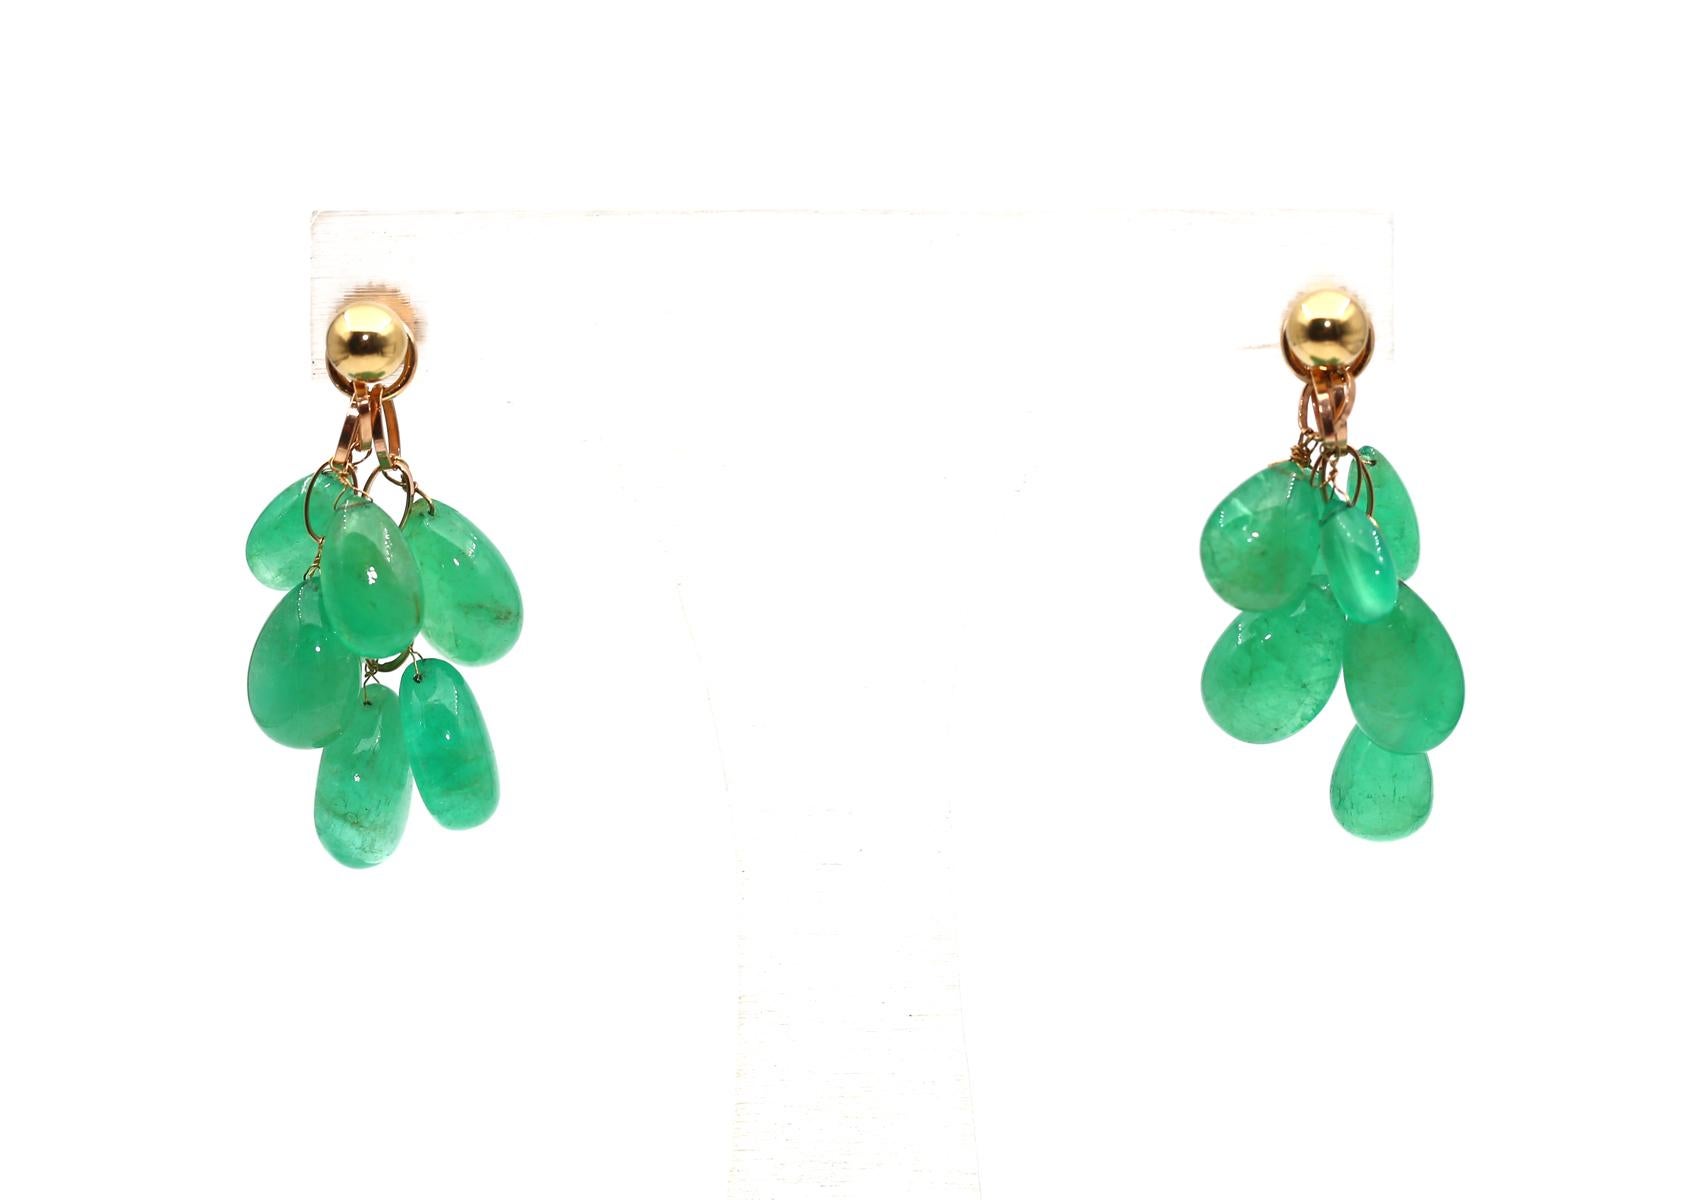 70 Carats Emerald Pear-Shaped Gold Earrings, 1955 In Good Condition For Sale In Herzelia, Tel Aviv